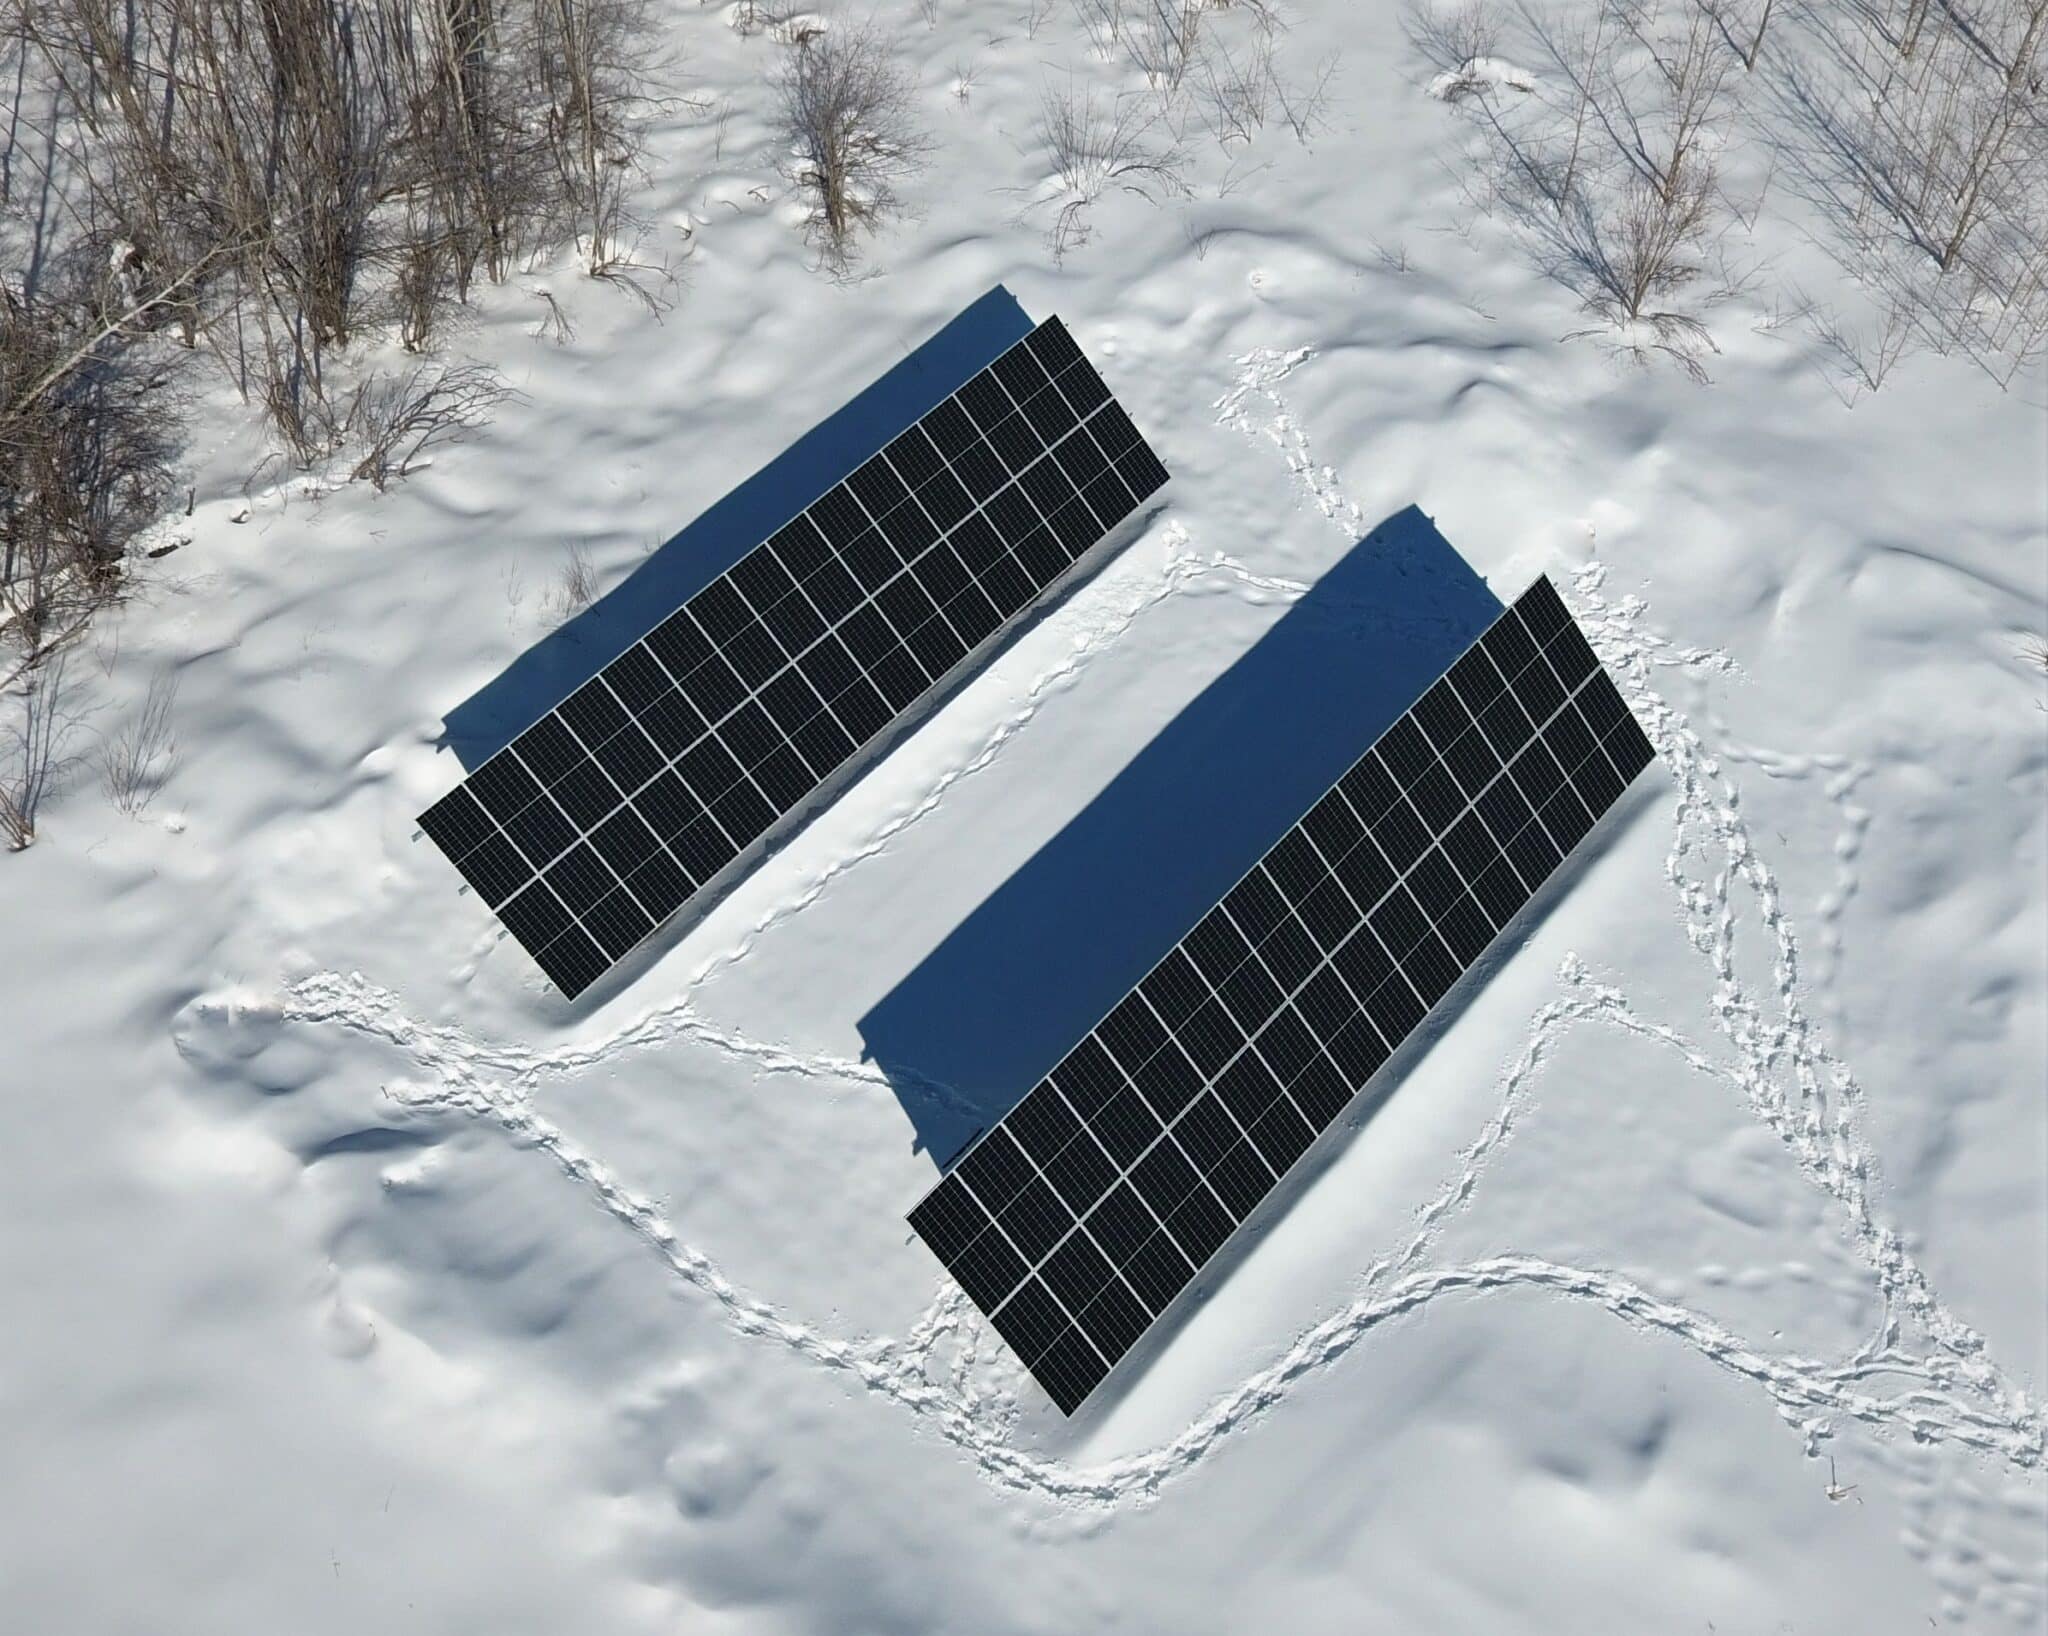 Two full solar arrays surrounded by snow.